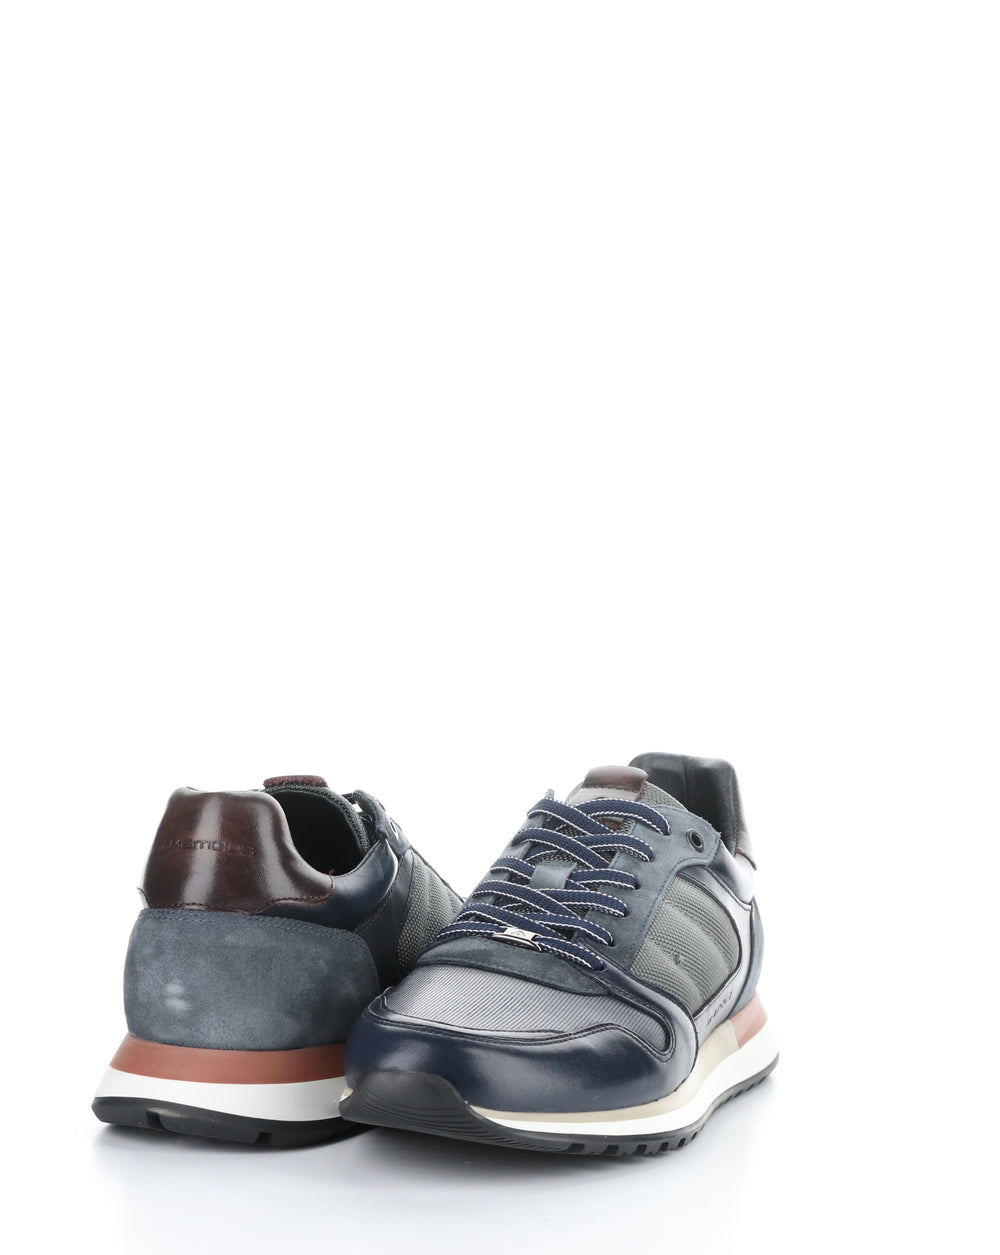 12554 NAVY/GREY Lace-up Shoes